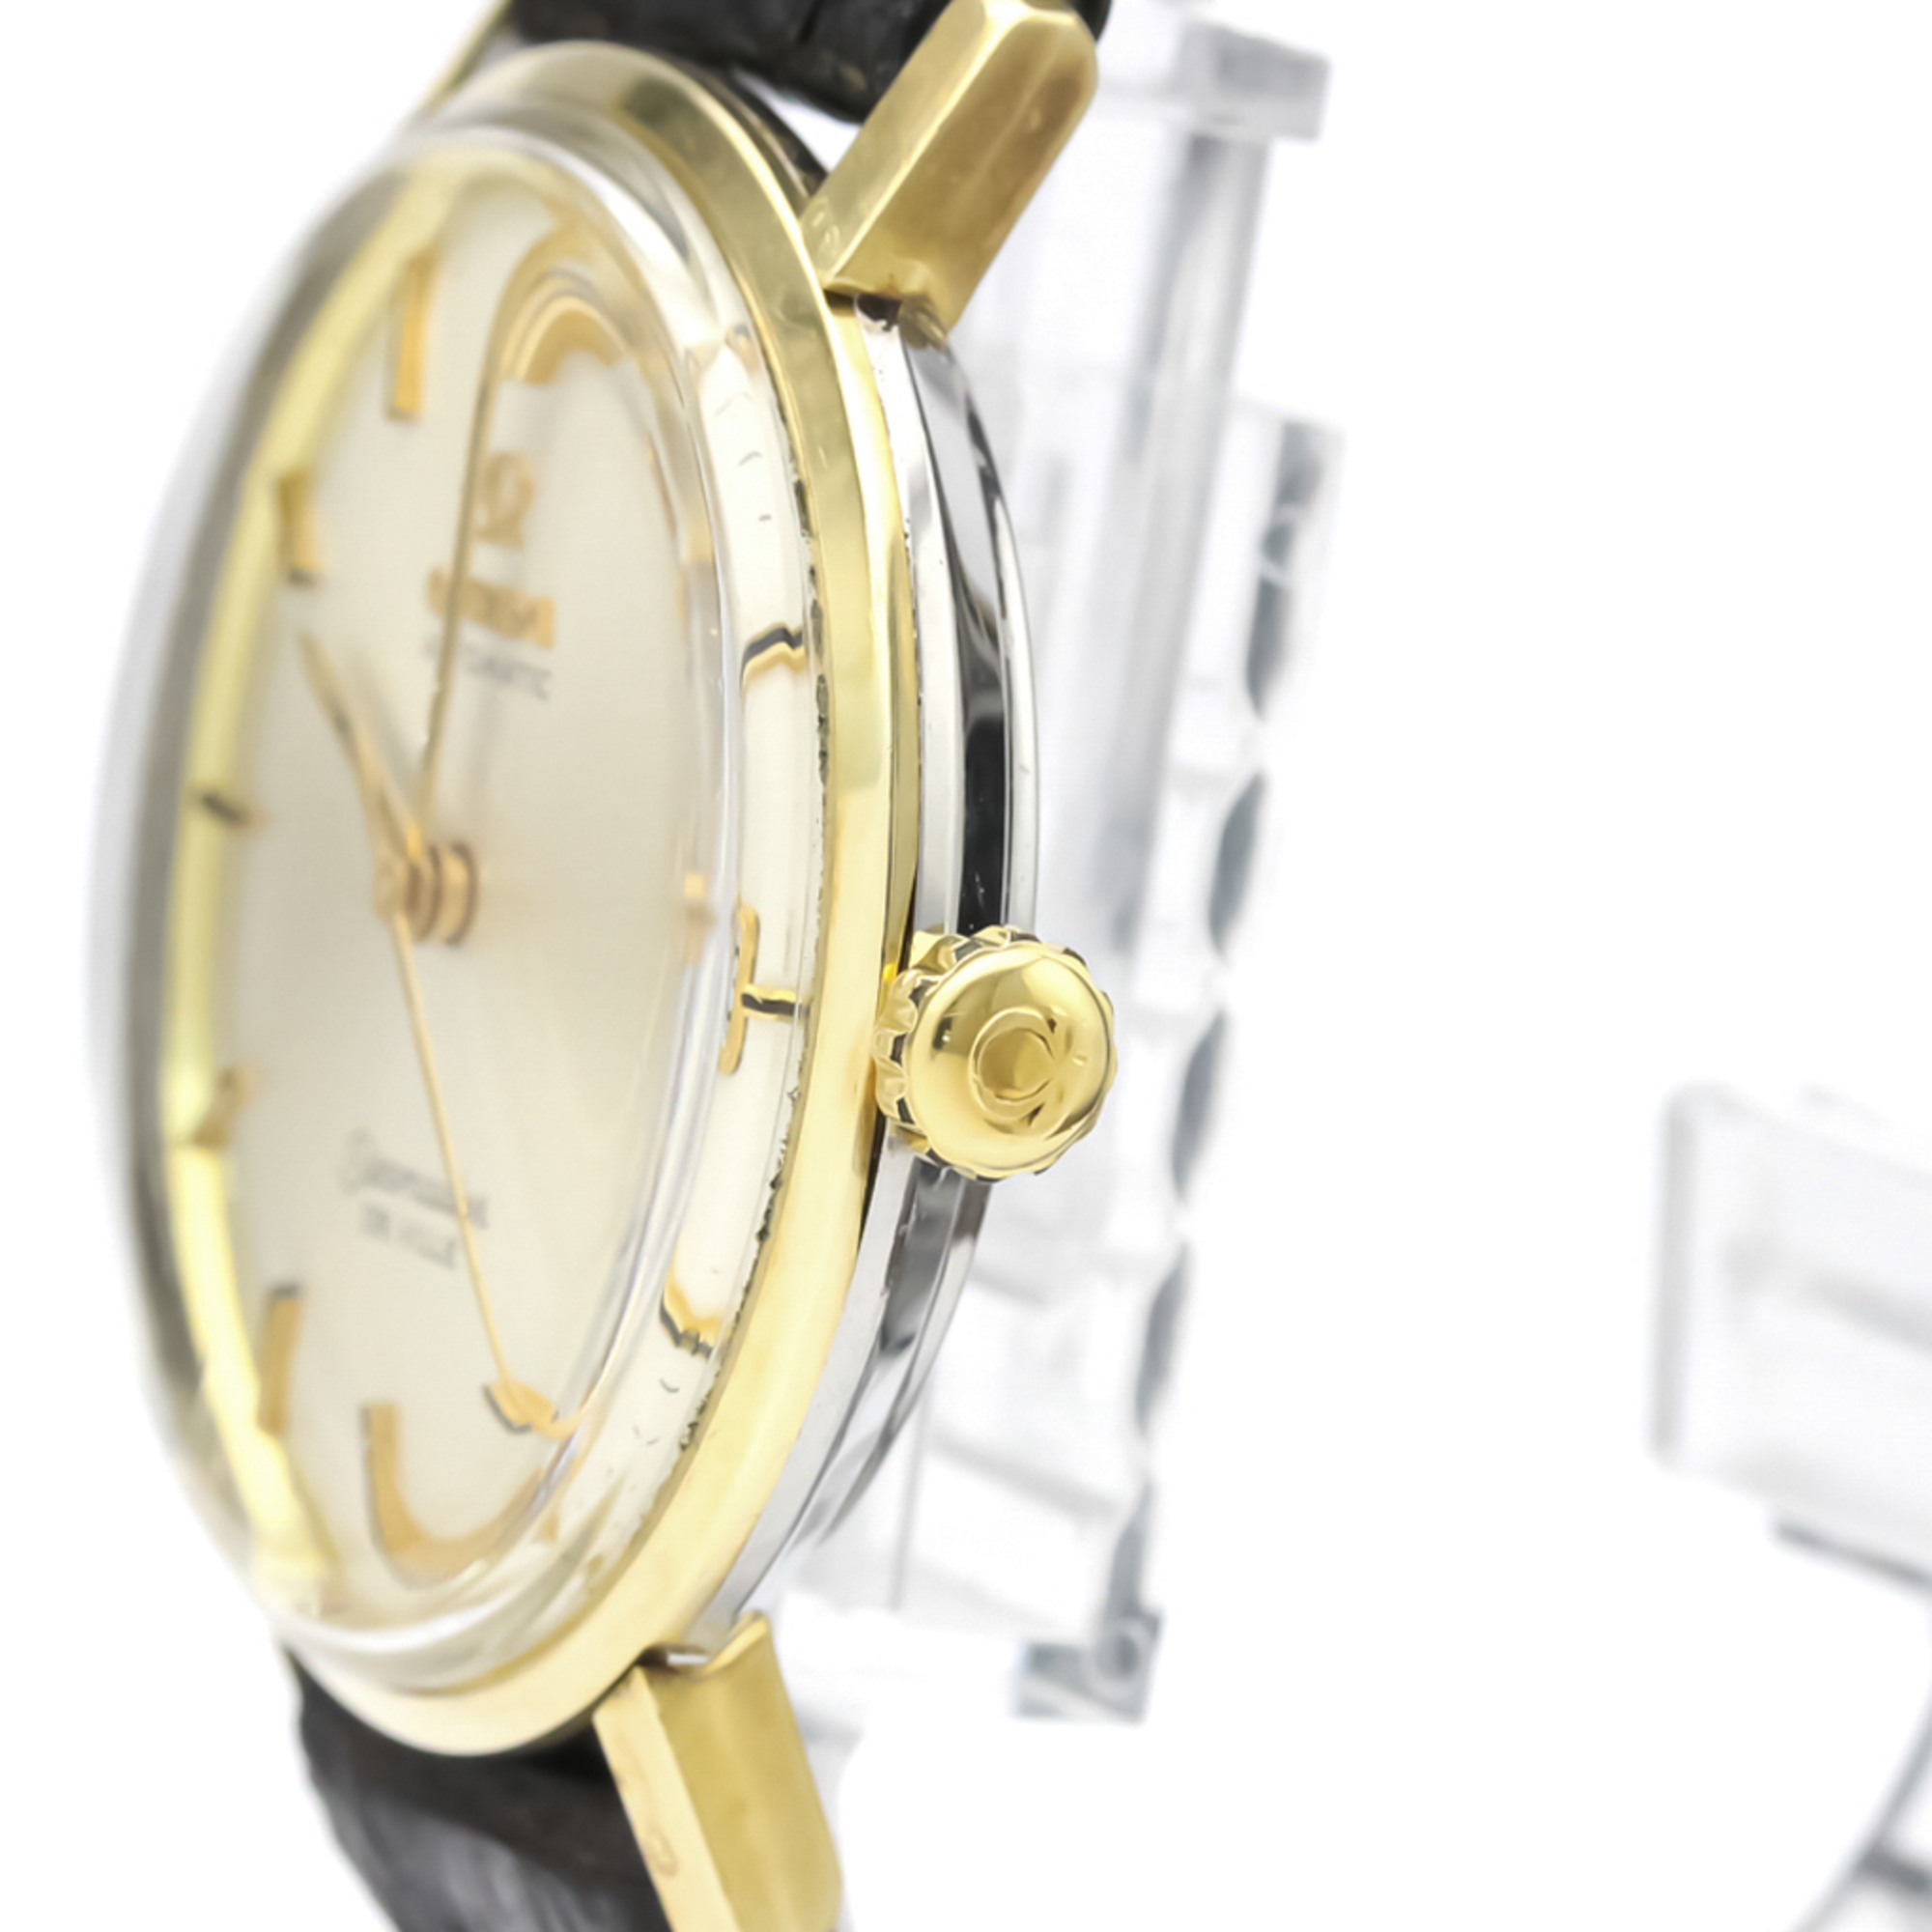 Omega Seamaster Automatic Gold Plated Men's Dress Watch